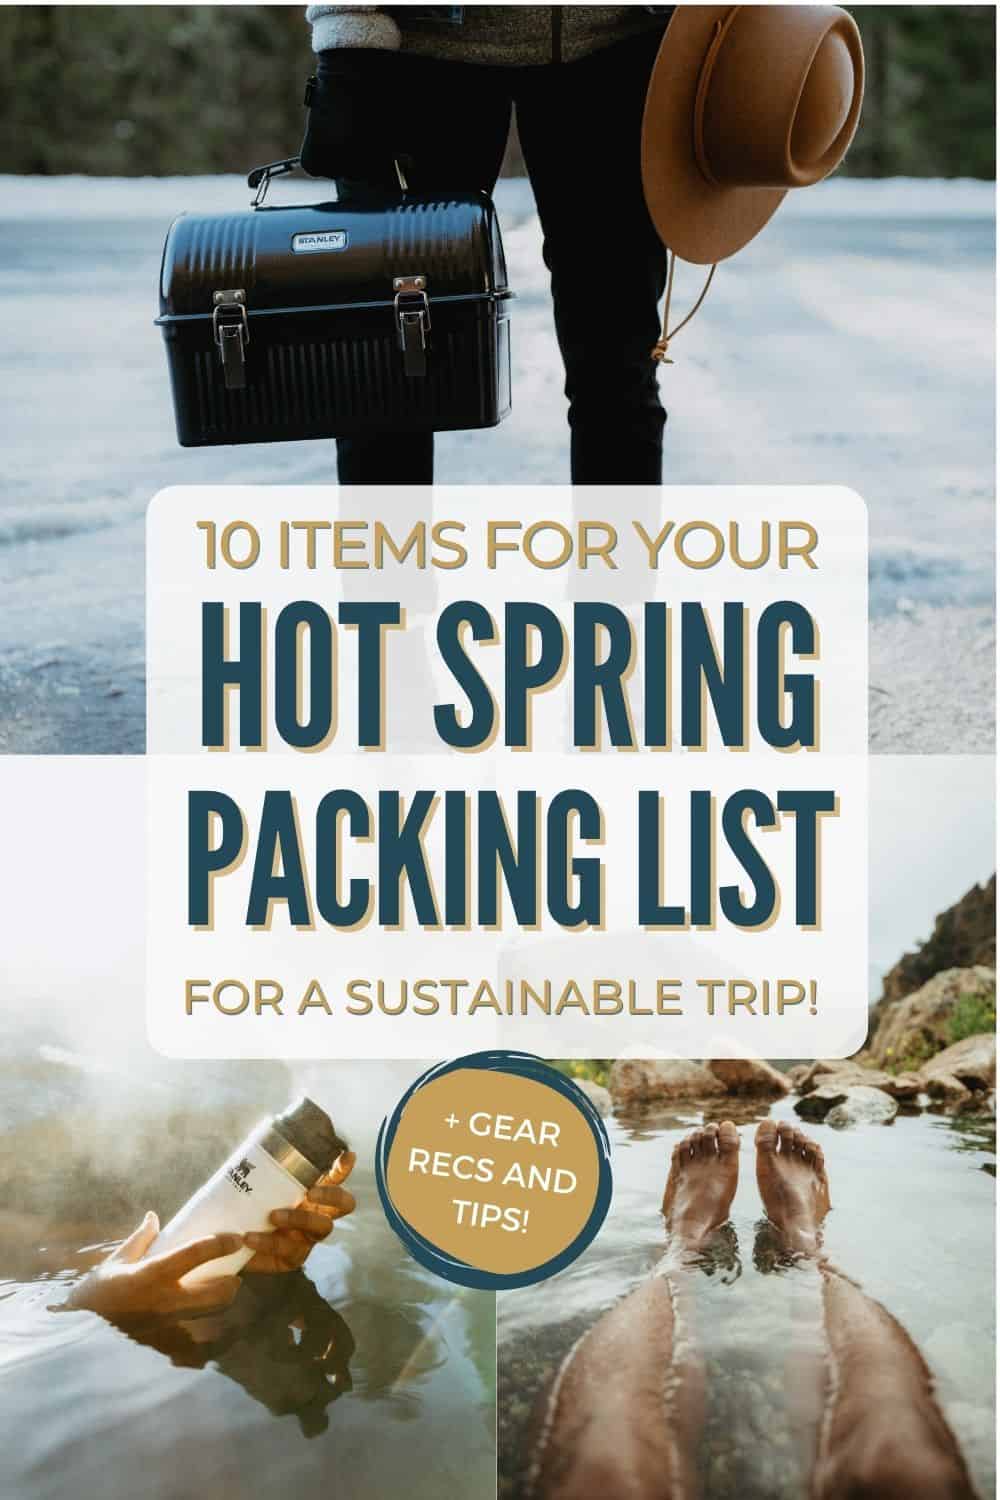 What should you pack for a hot spring? Discover the essentials to put on your hot springs packing list, for a responsible and ethical soak! We're sharing everything from the basic towel and swimsuit, and even more gear for camping and trail hiking to the pools! #hotsprings #trail #camping #packinglist #hotspring #idaho #lolopass